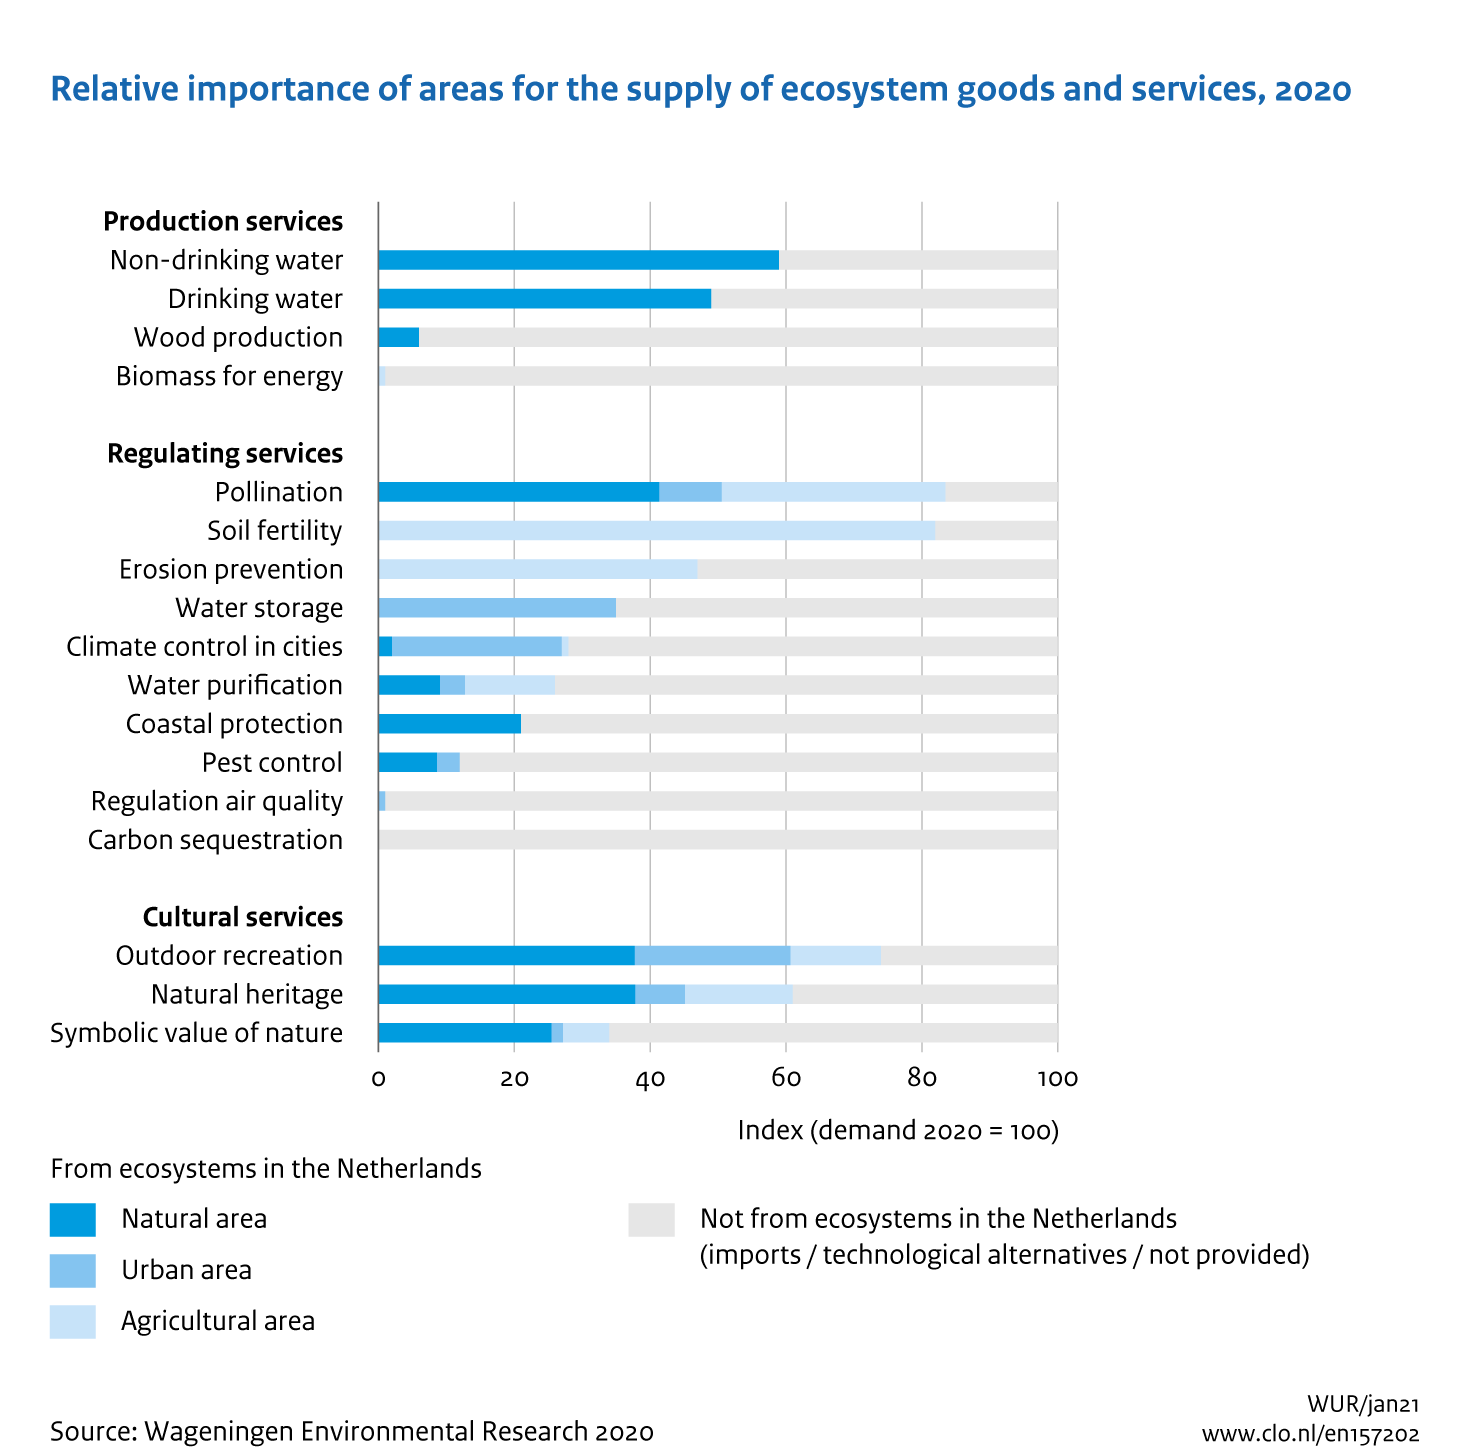 Image Relative importance of areas for the supply of ecosystem goods and service, 2020. The image is further explained in the text.